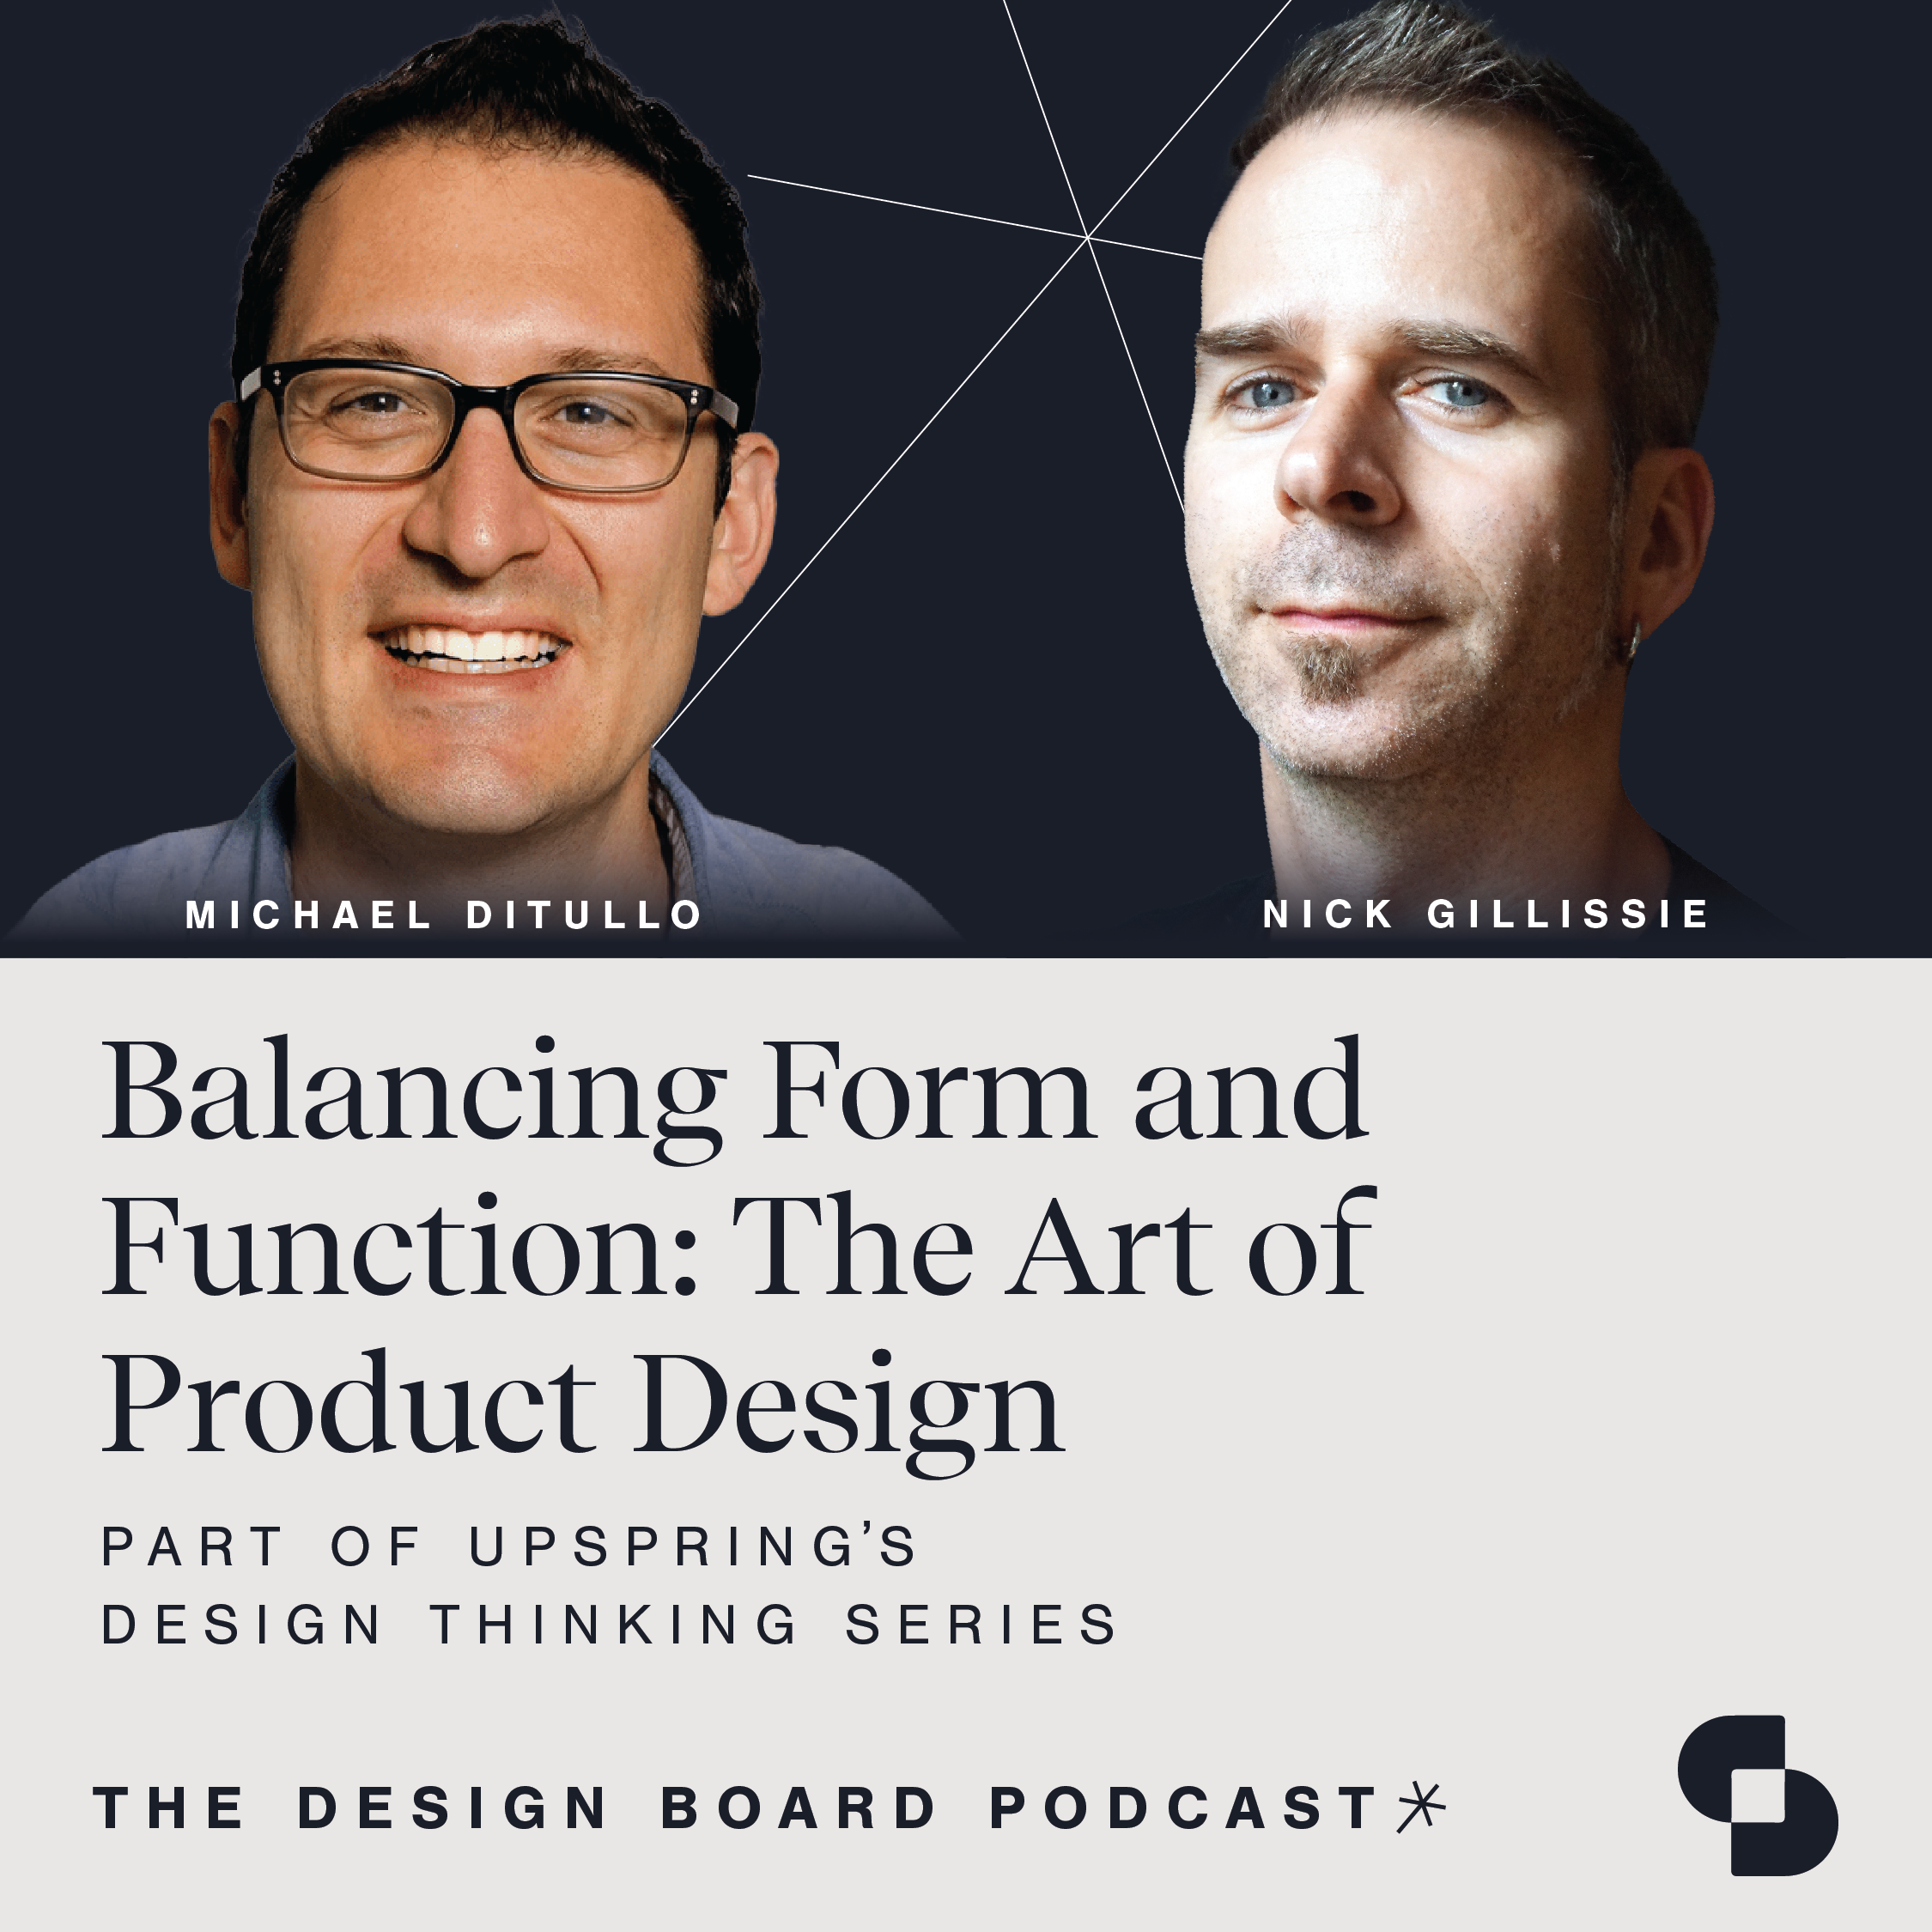 Balancing Form and Function: The Art of Product Design episode cover art for The Design Board podcast